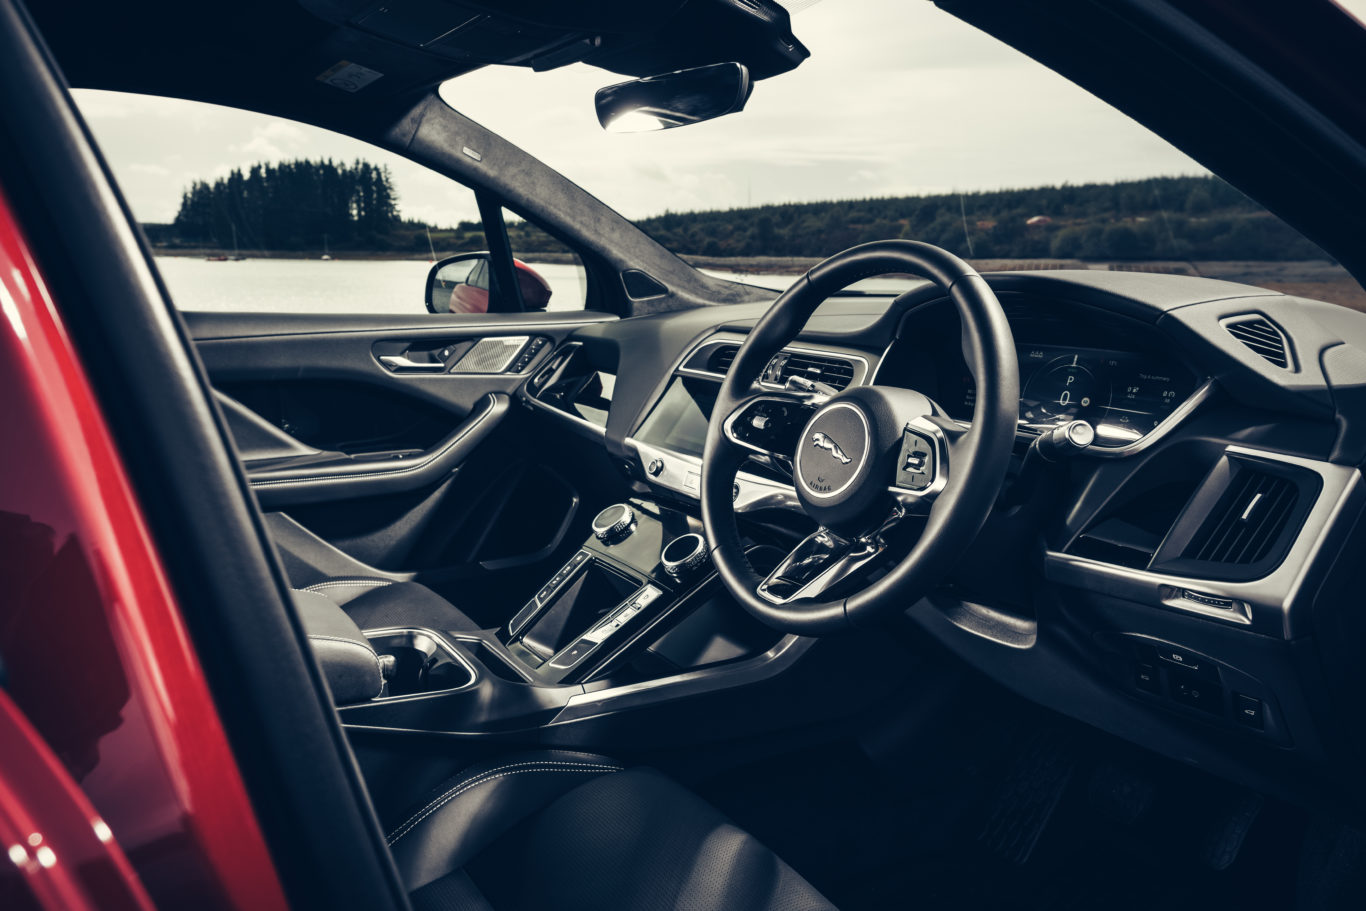 The I-Pace's interior features some high-end tech